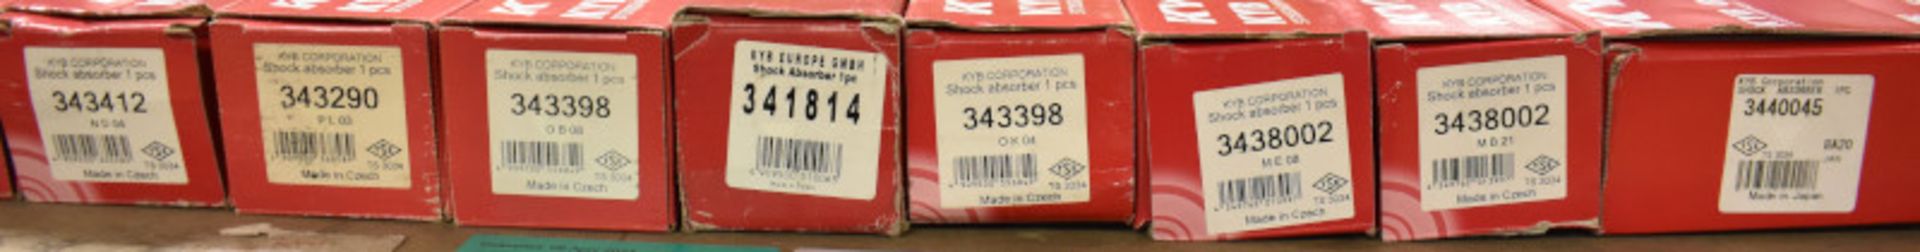 16x KYB Excel-G Gas Shock Absorbers - Please see pictures for examples of model numbers - Image 3 of 4